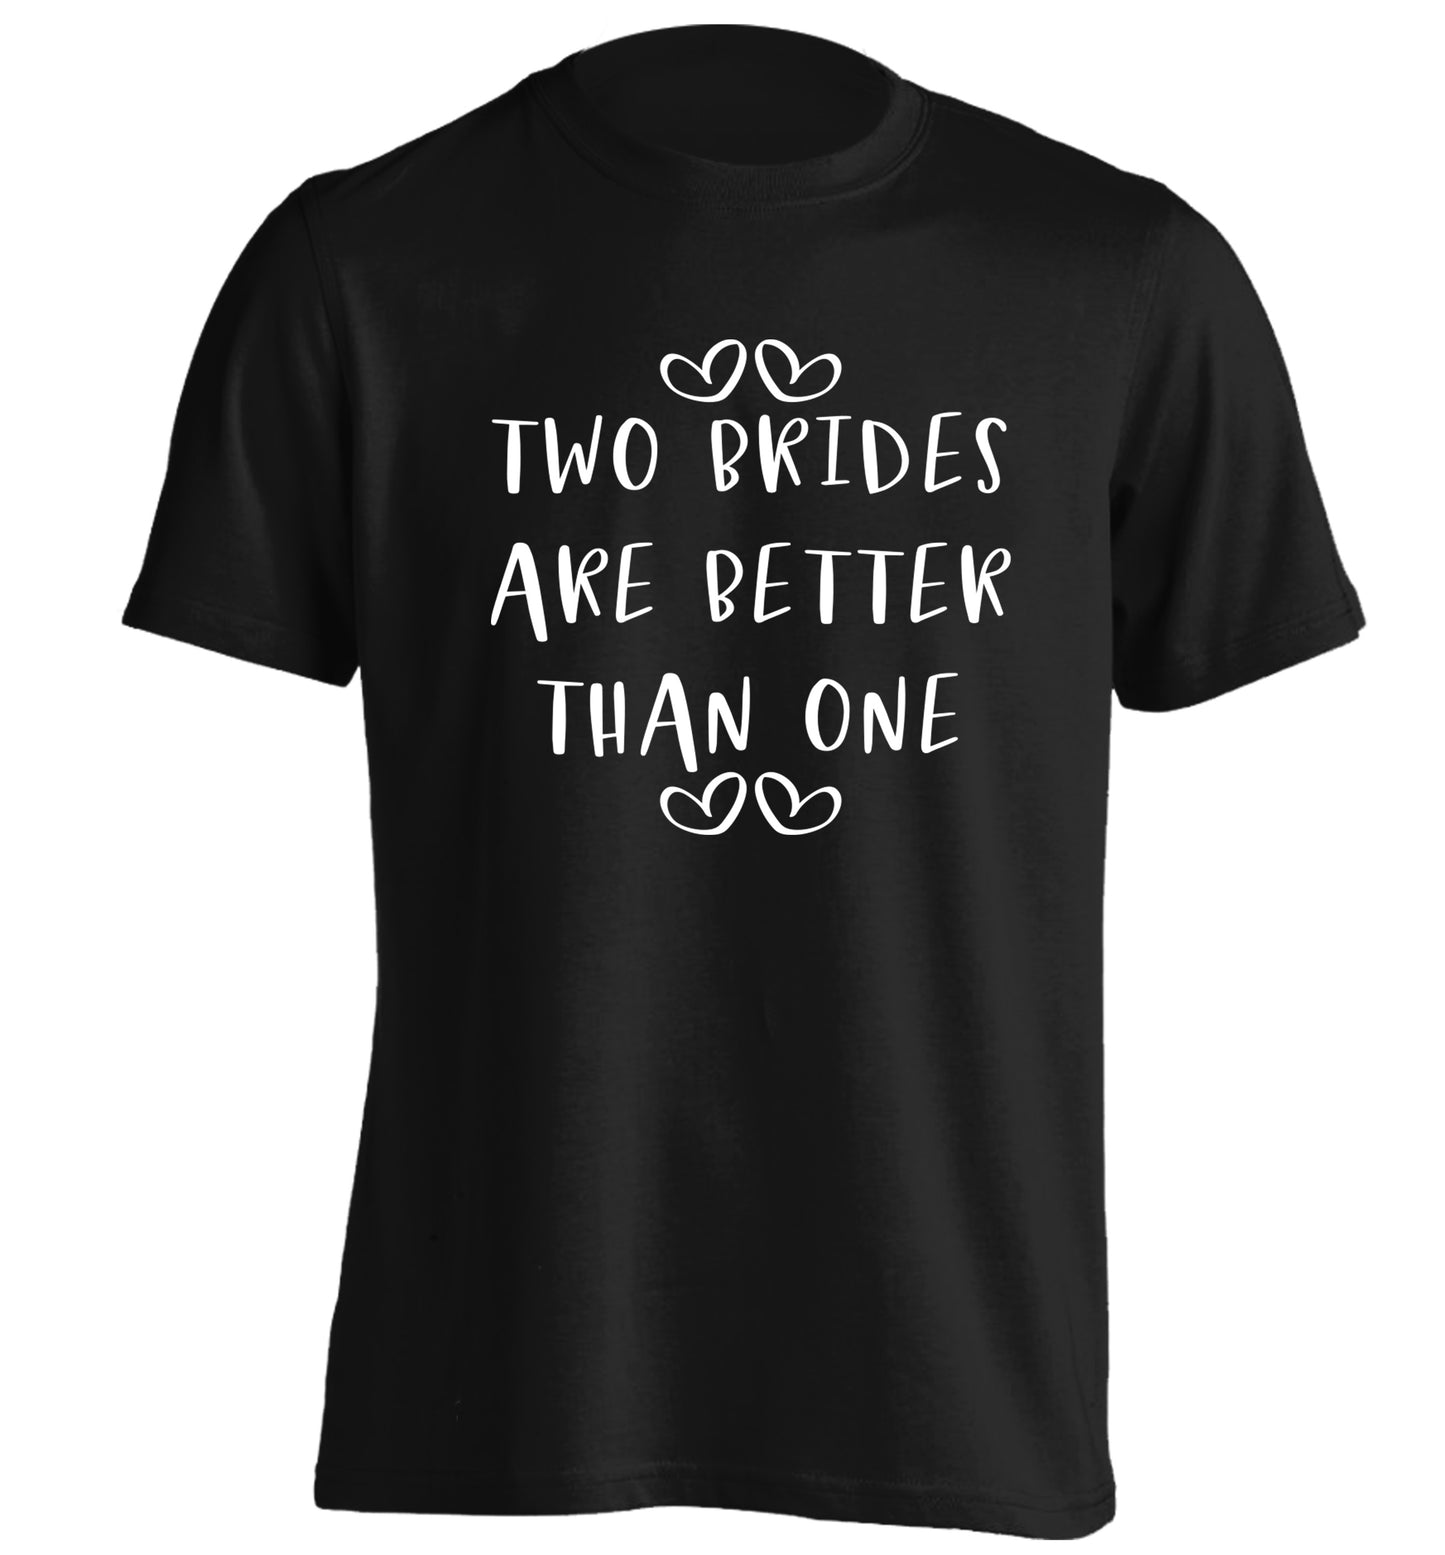 Two brides are better than one adults unisex black Tshirt 2XL